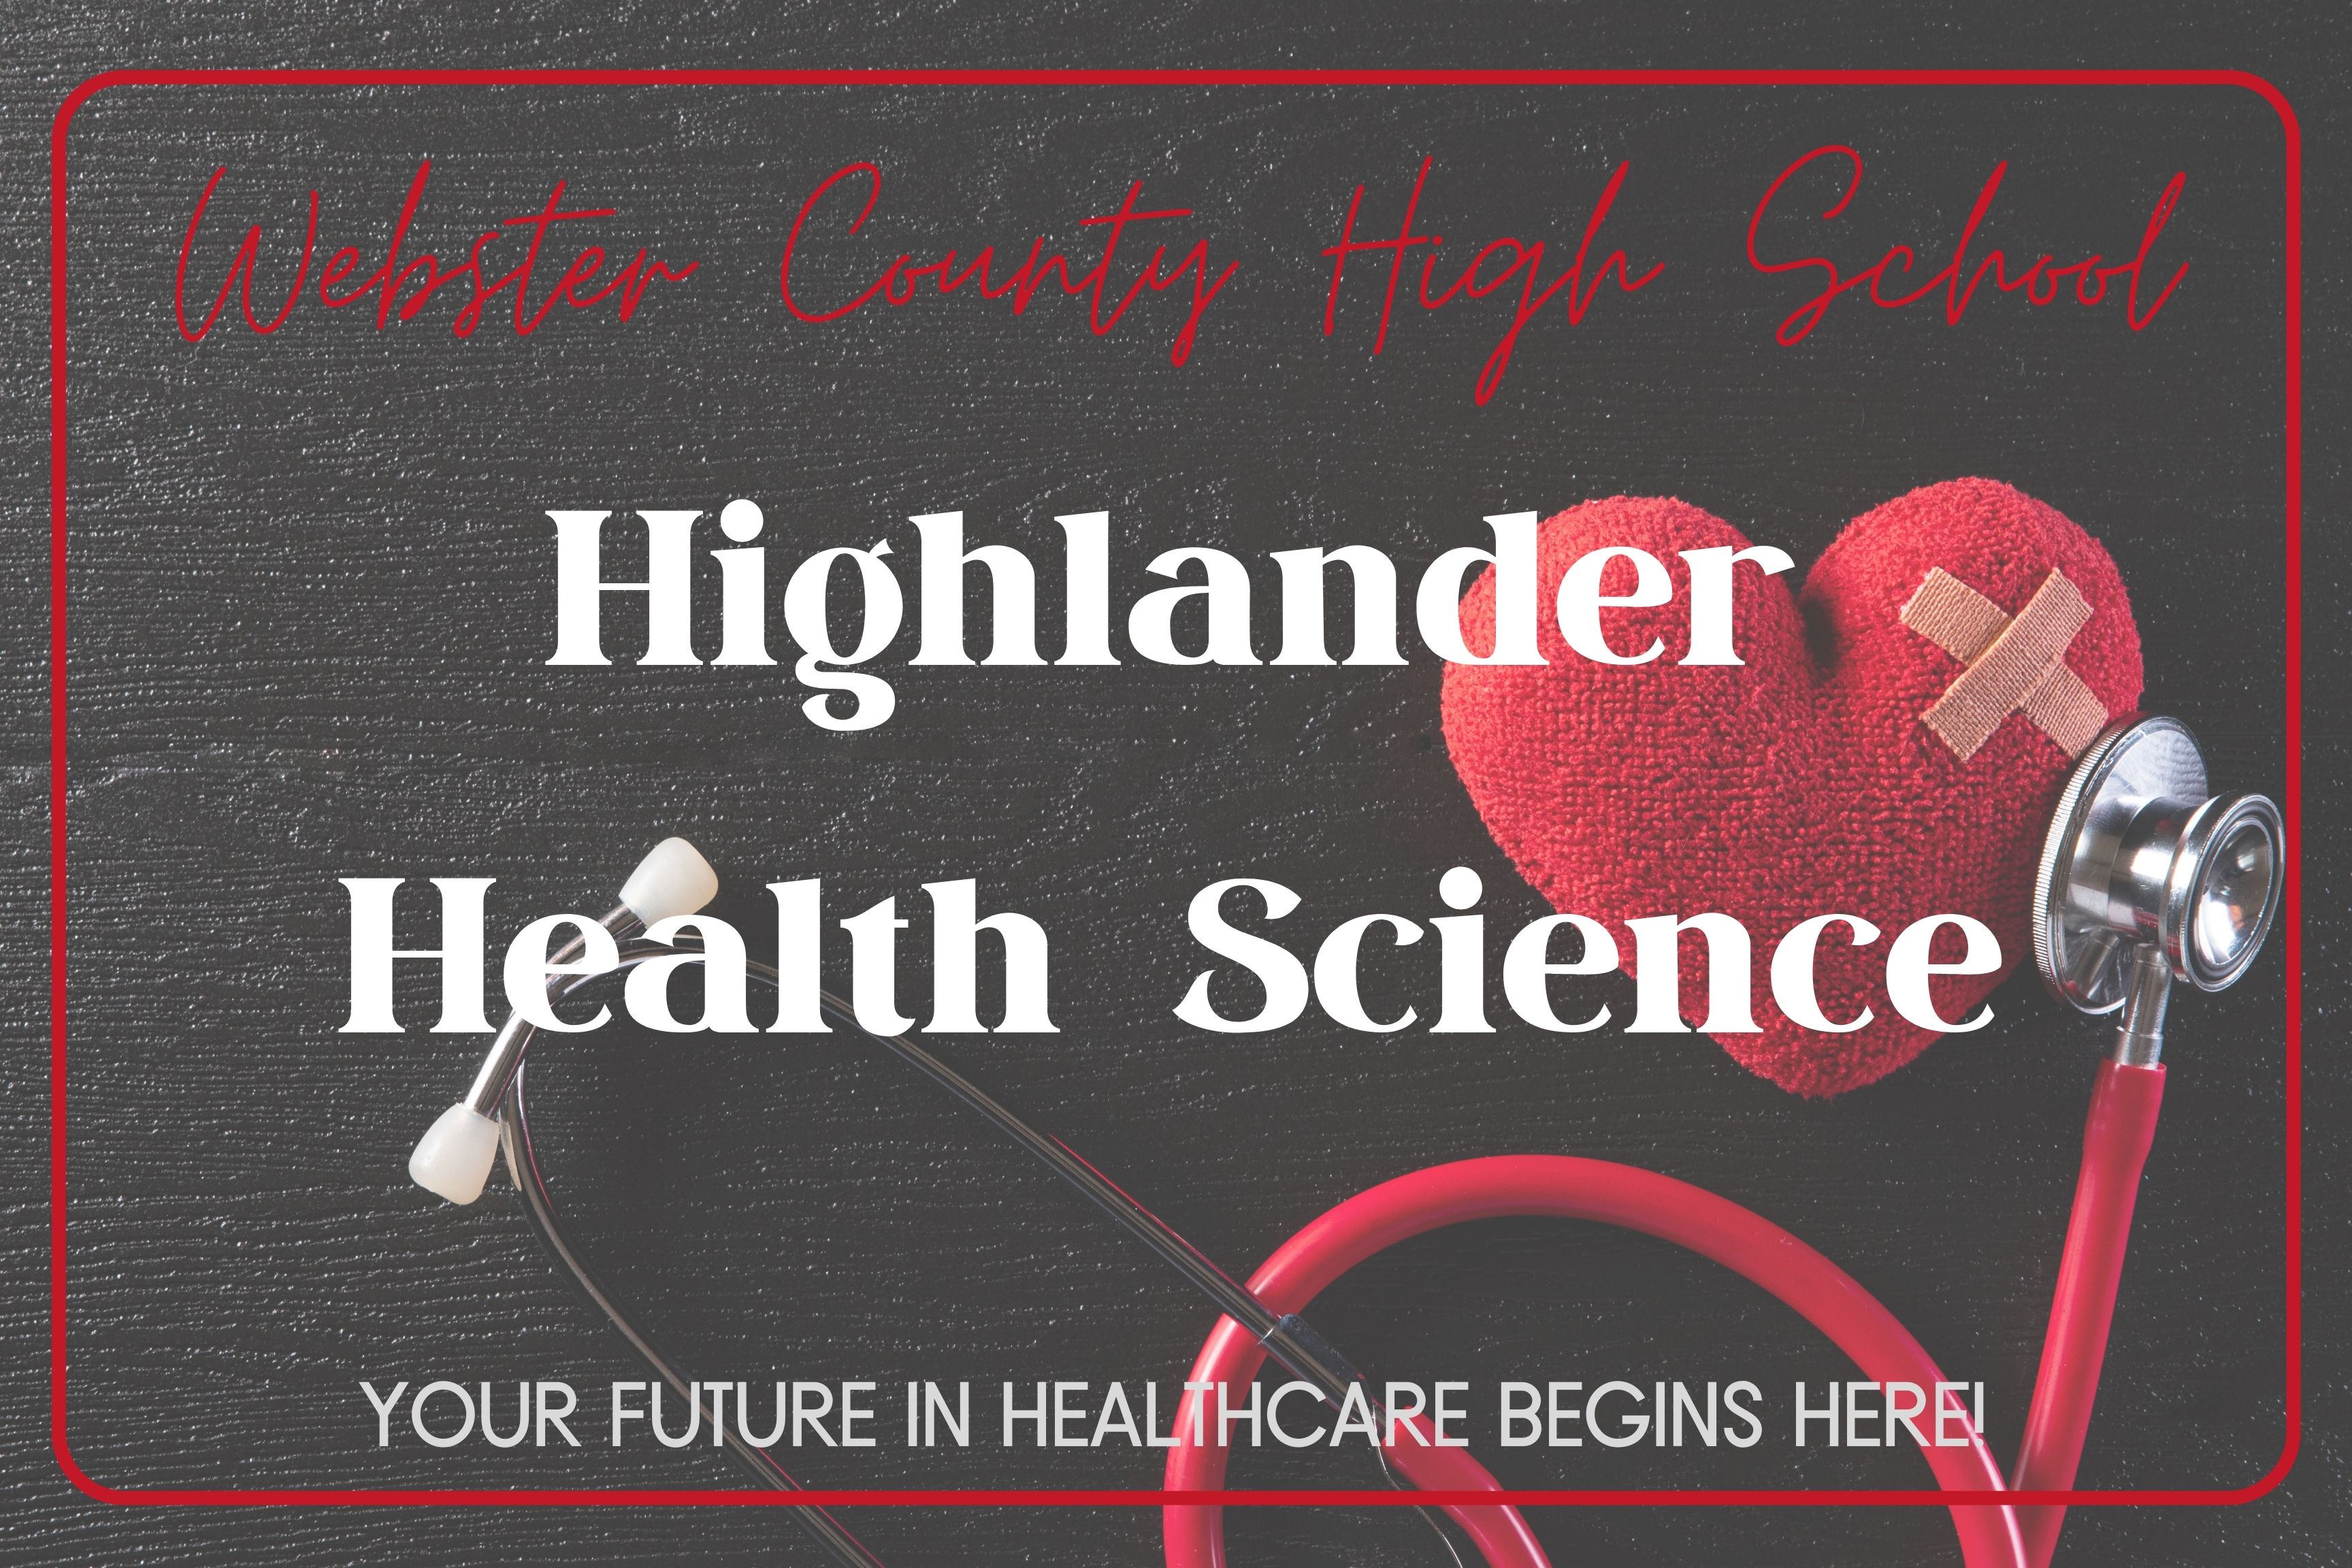 Your future in healthcare begins here!